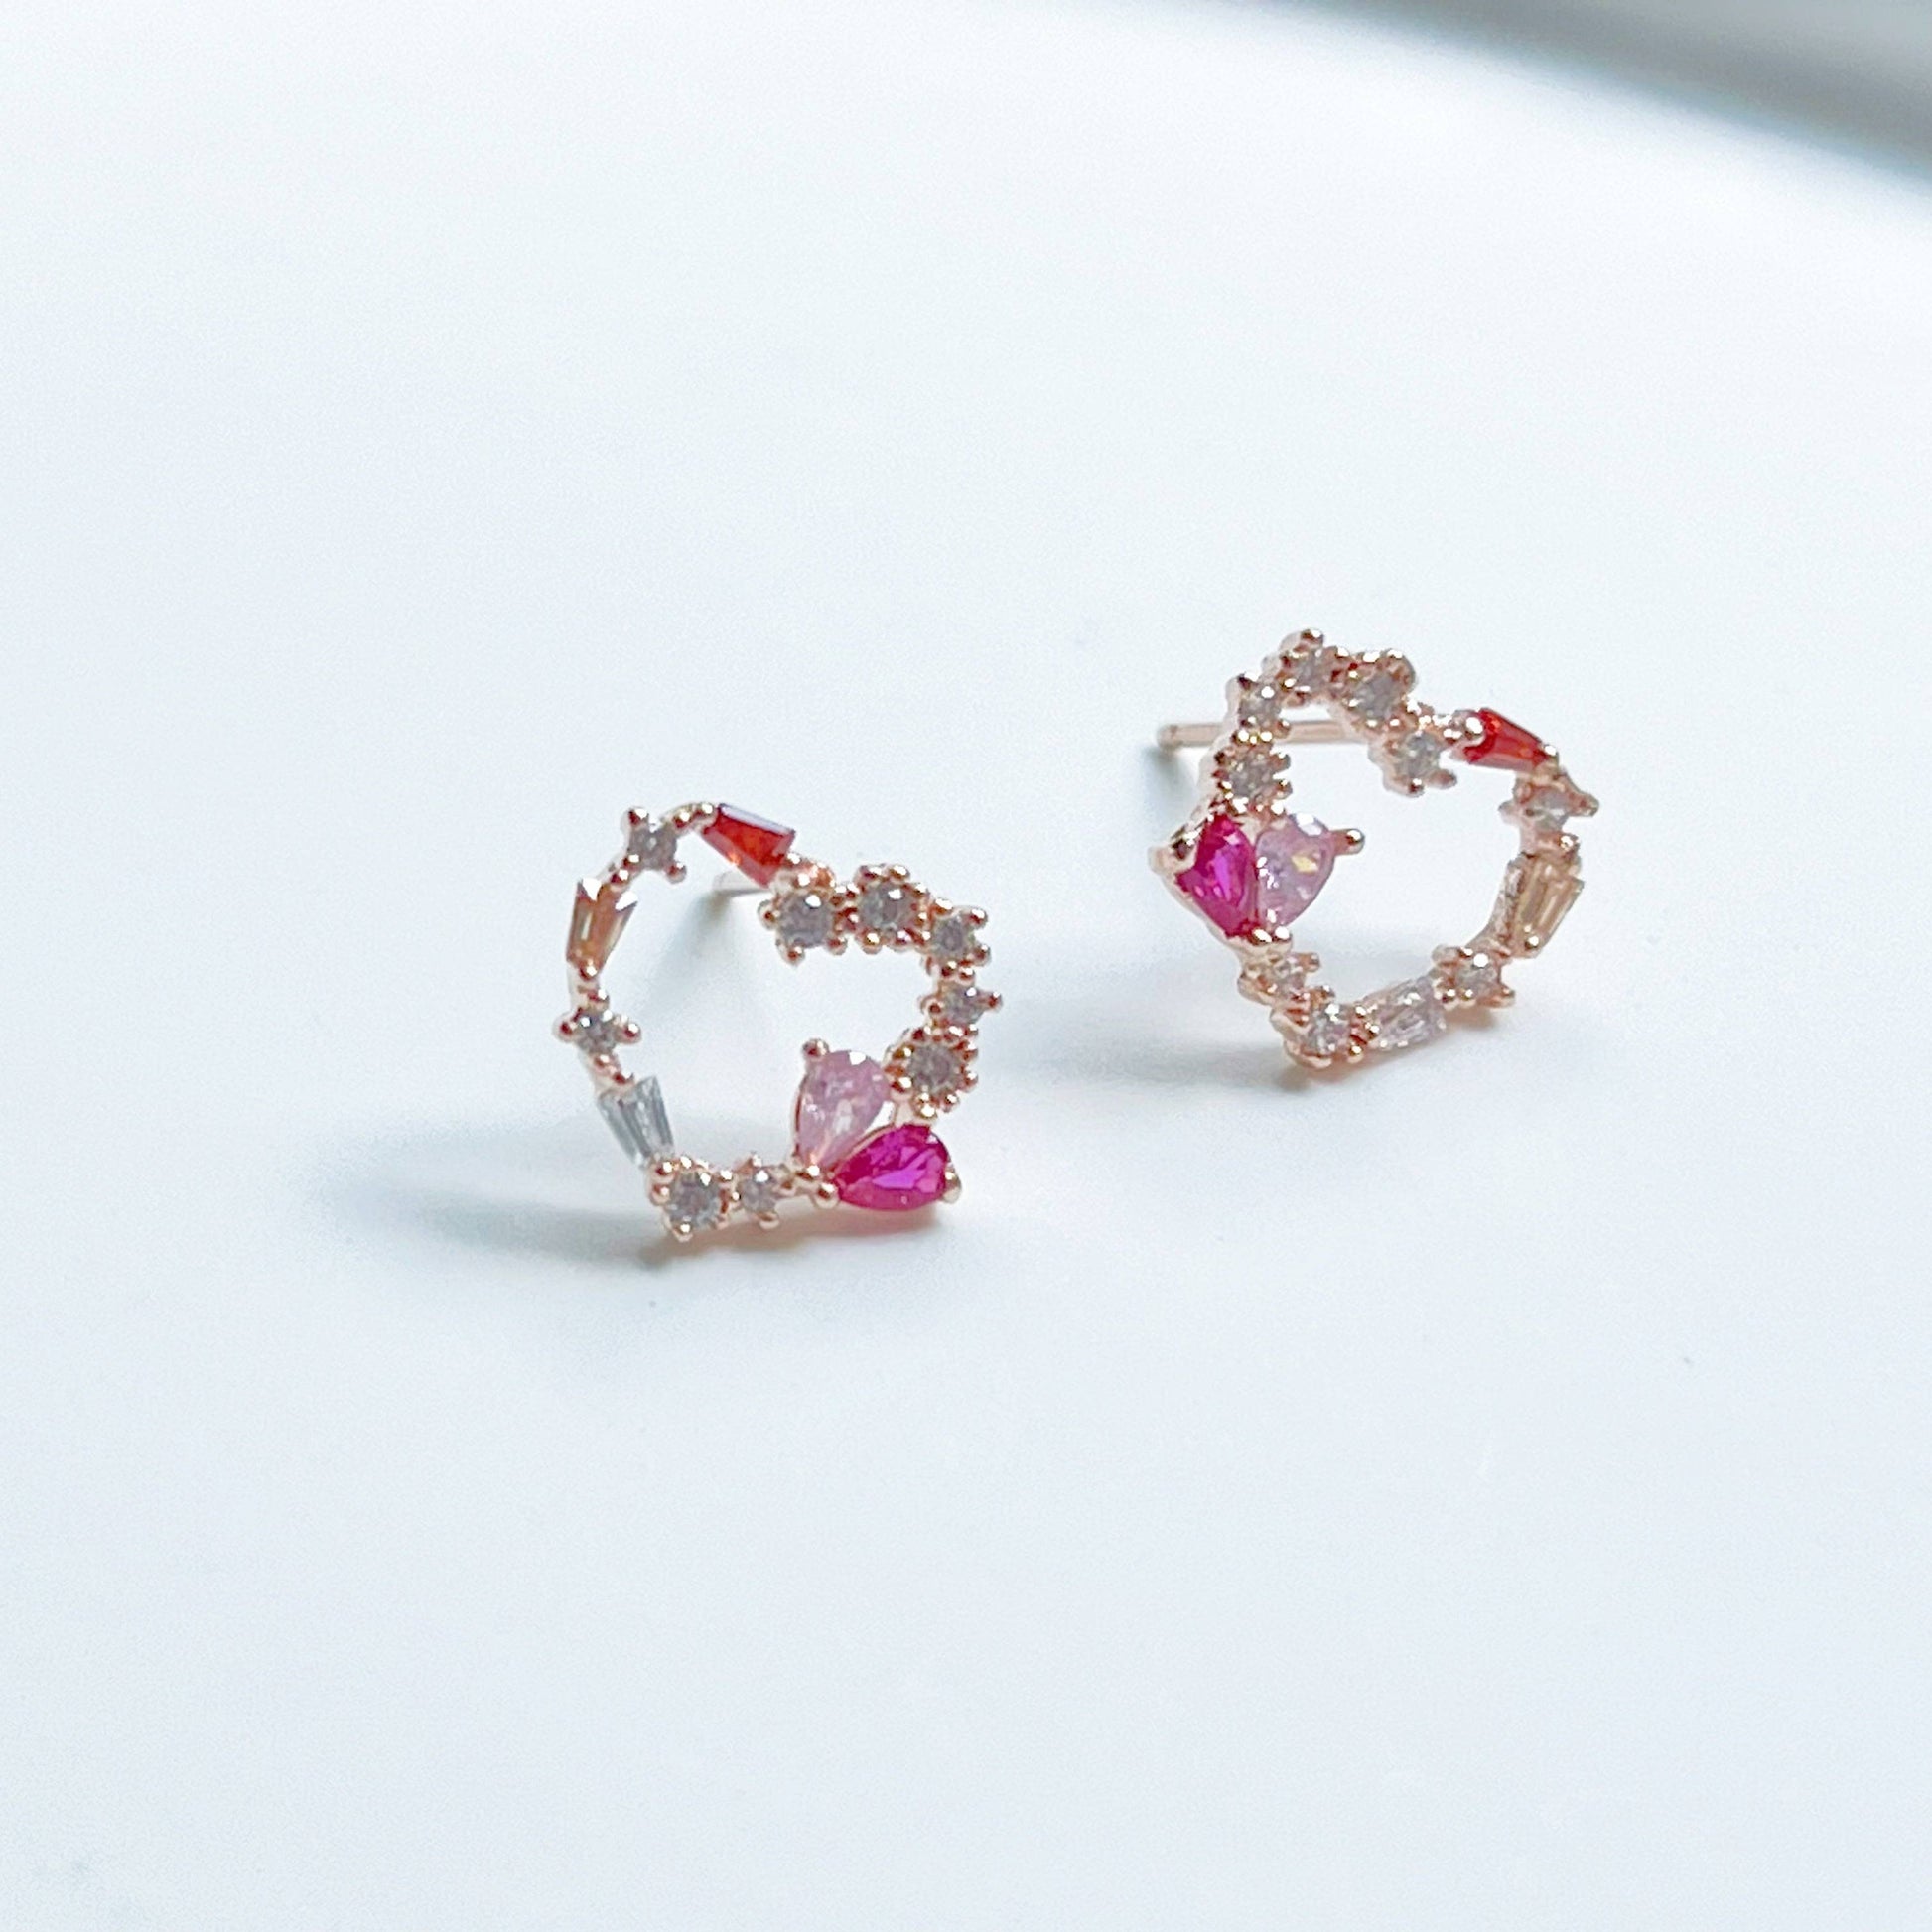 Dark Pink Crystal Heart and Star Sterling Silver Studs Earrings-Ninaouity